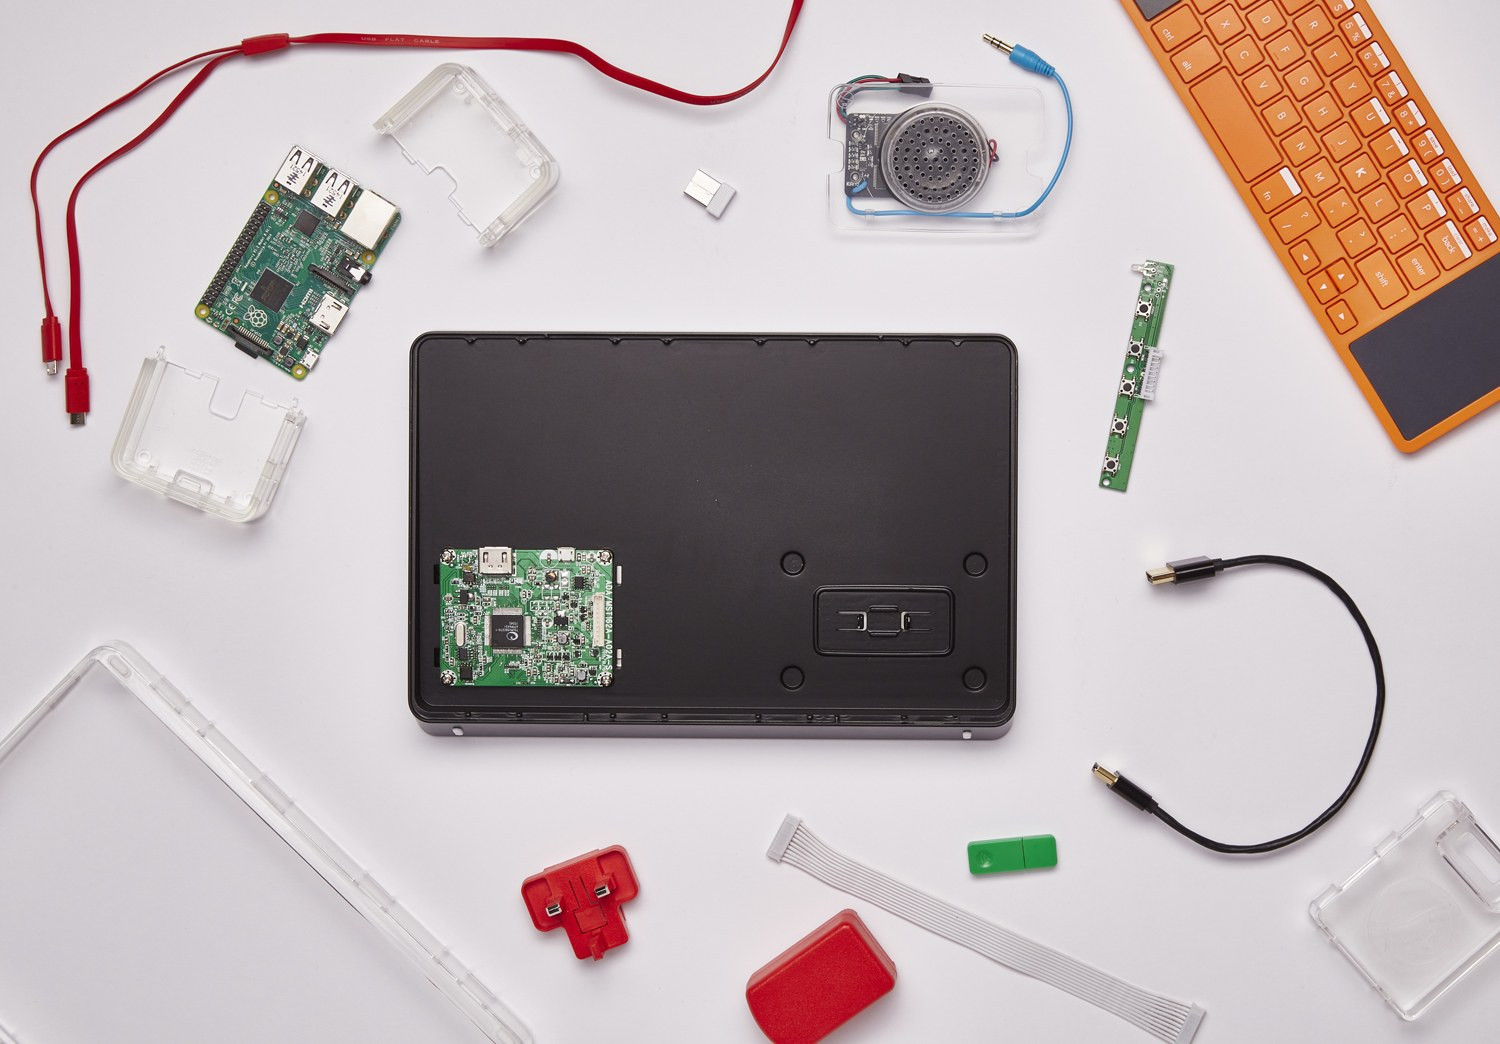 DIY Computers Kits
 Kano the Coolest DIY puter Kit Now Lets You Build It